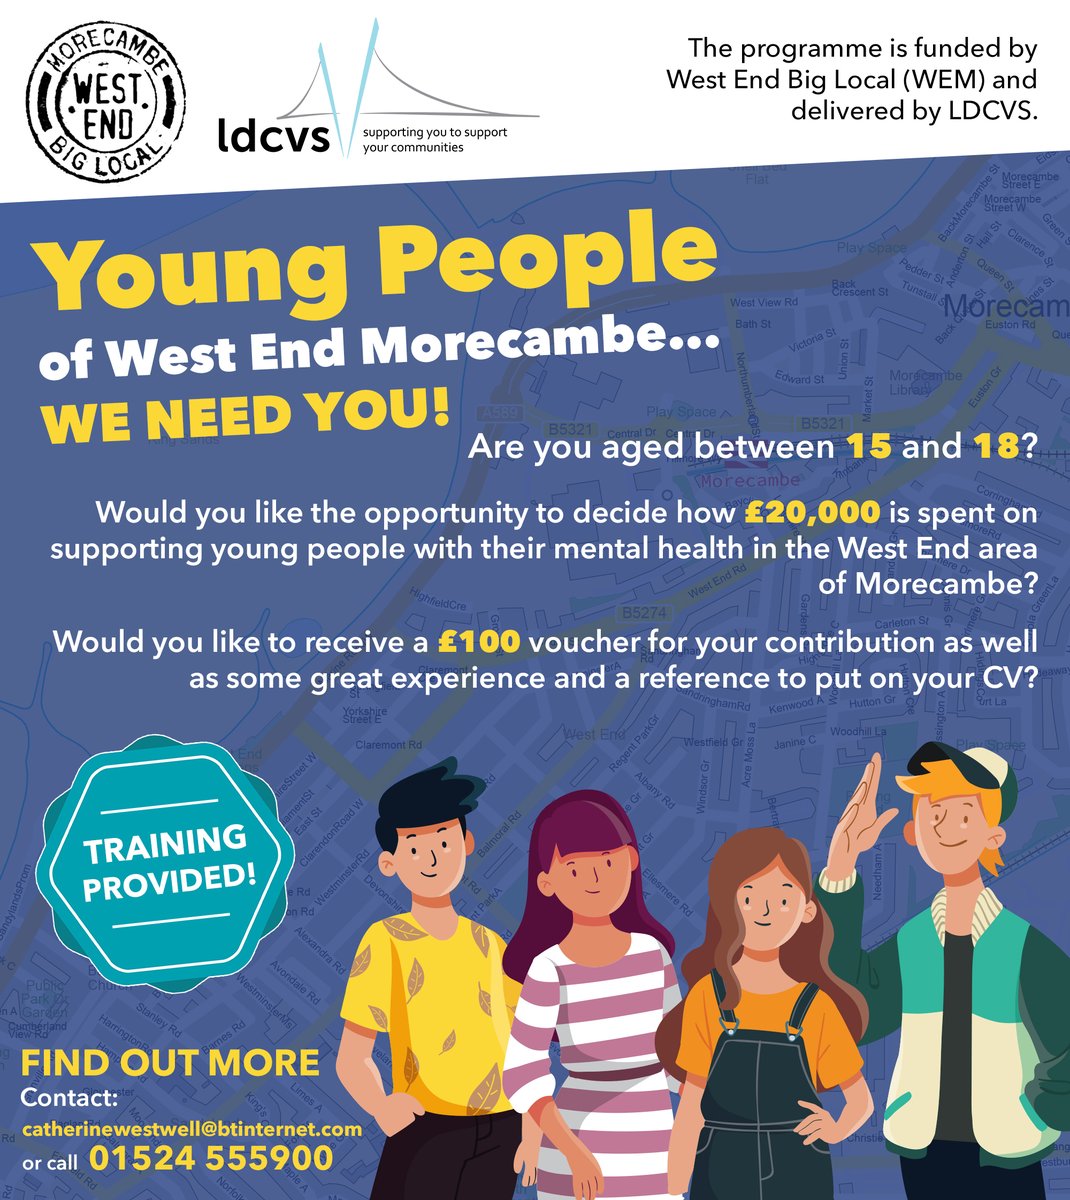 📢 Calling young leaders in West End #Morecambe! Shape the future of mental health support with £20k at your fingertips. Get involved, gain experience, and earn rewards! Email catherinewestwell@btinternet.com or call 01524 555900 for more🌟 #YouthLeadership #MentalHealthSupport